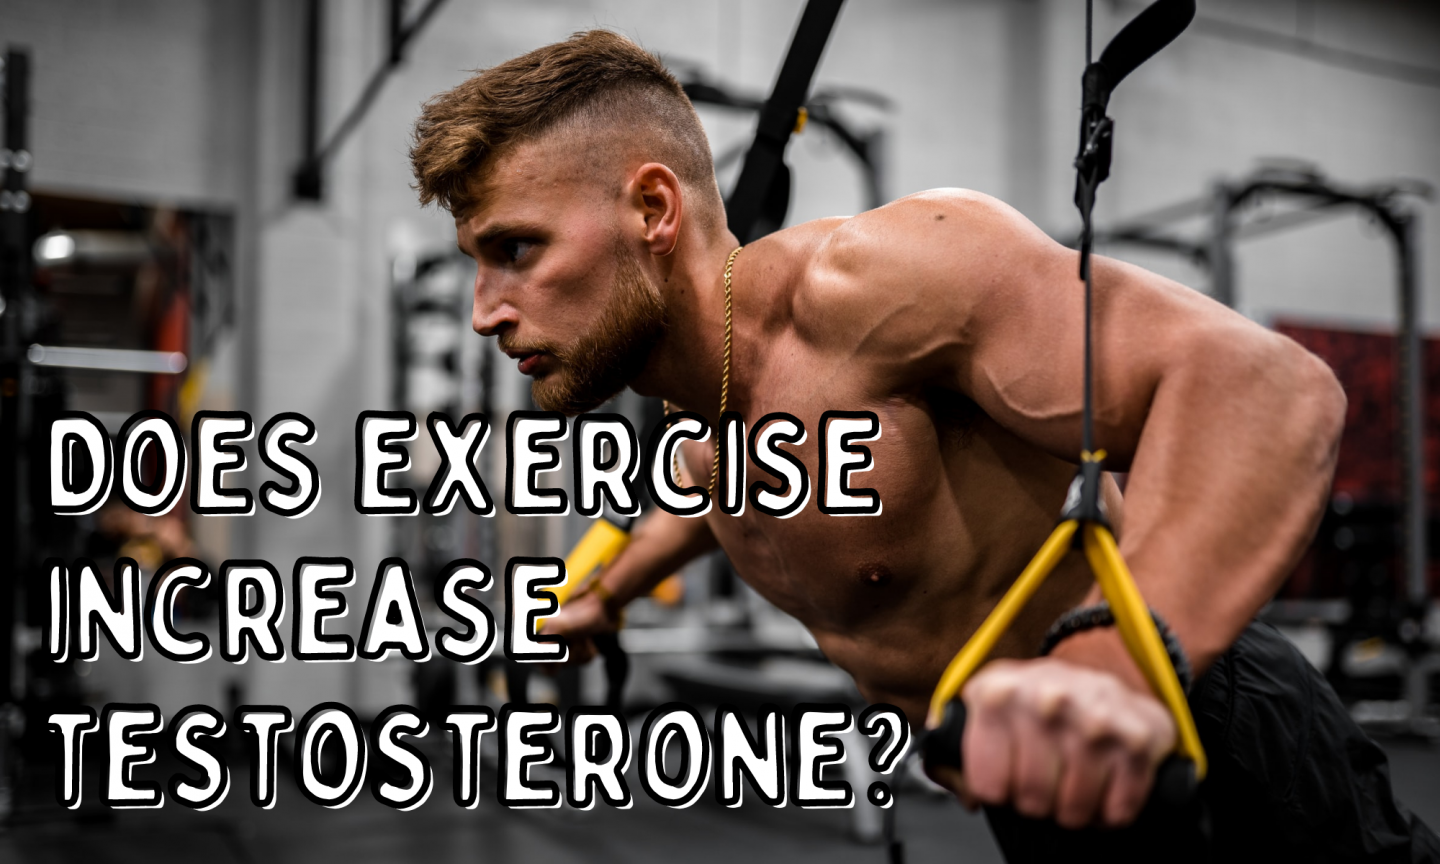 Does exercise increase testosterone?